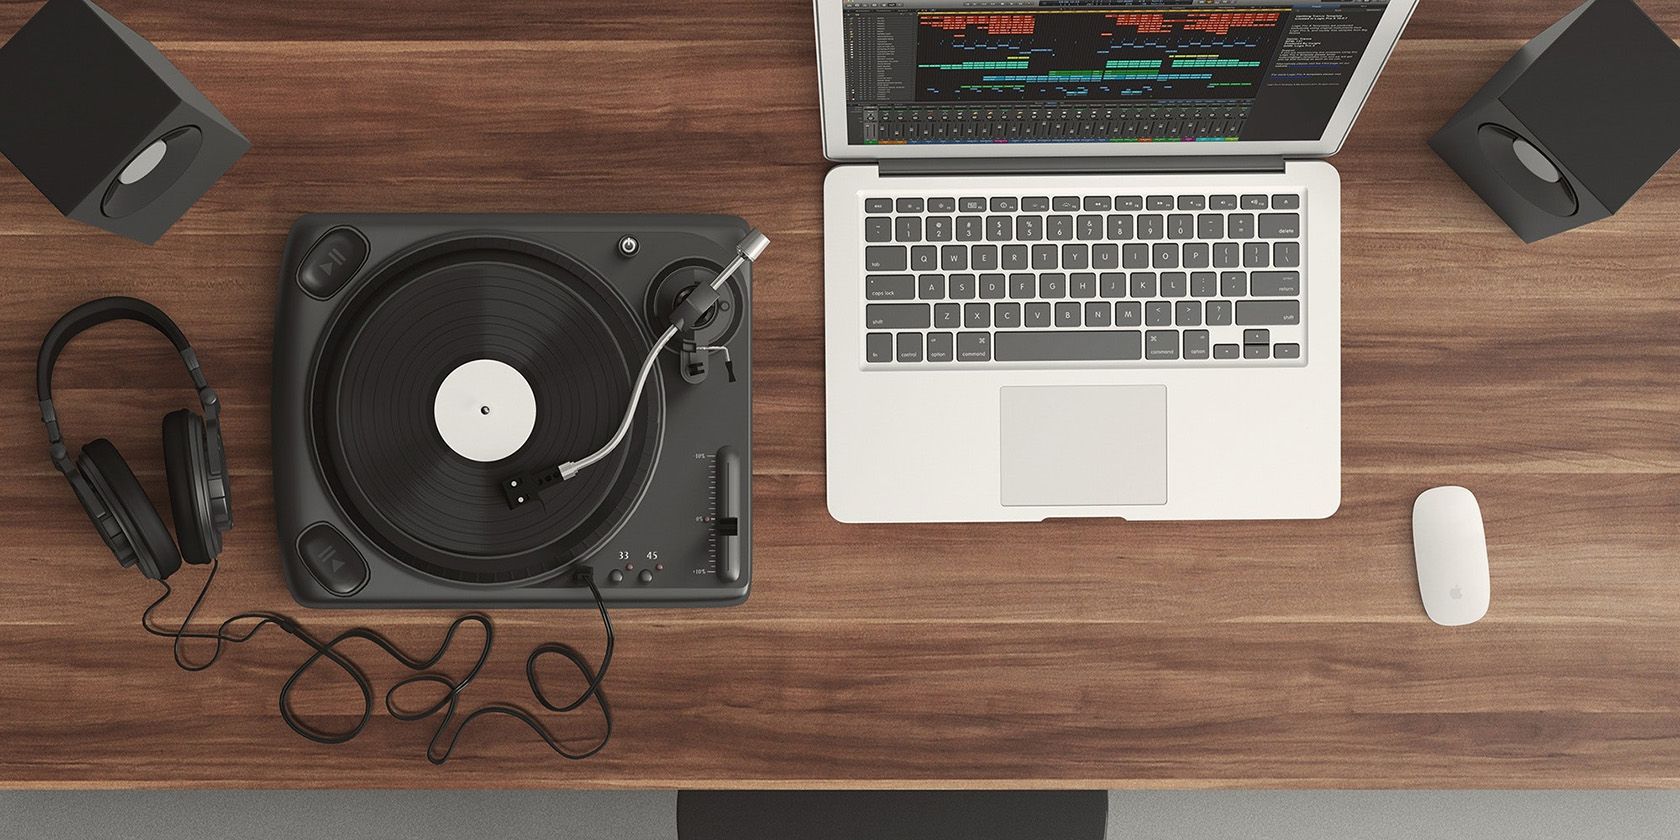 MacBook next to a record player.